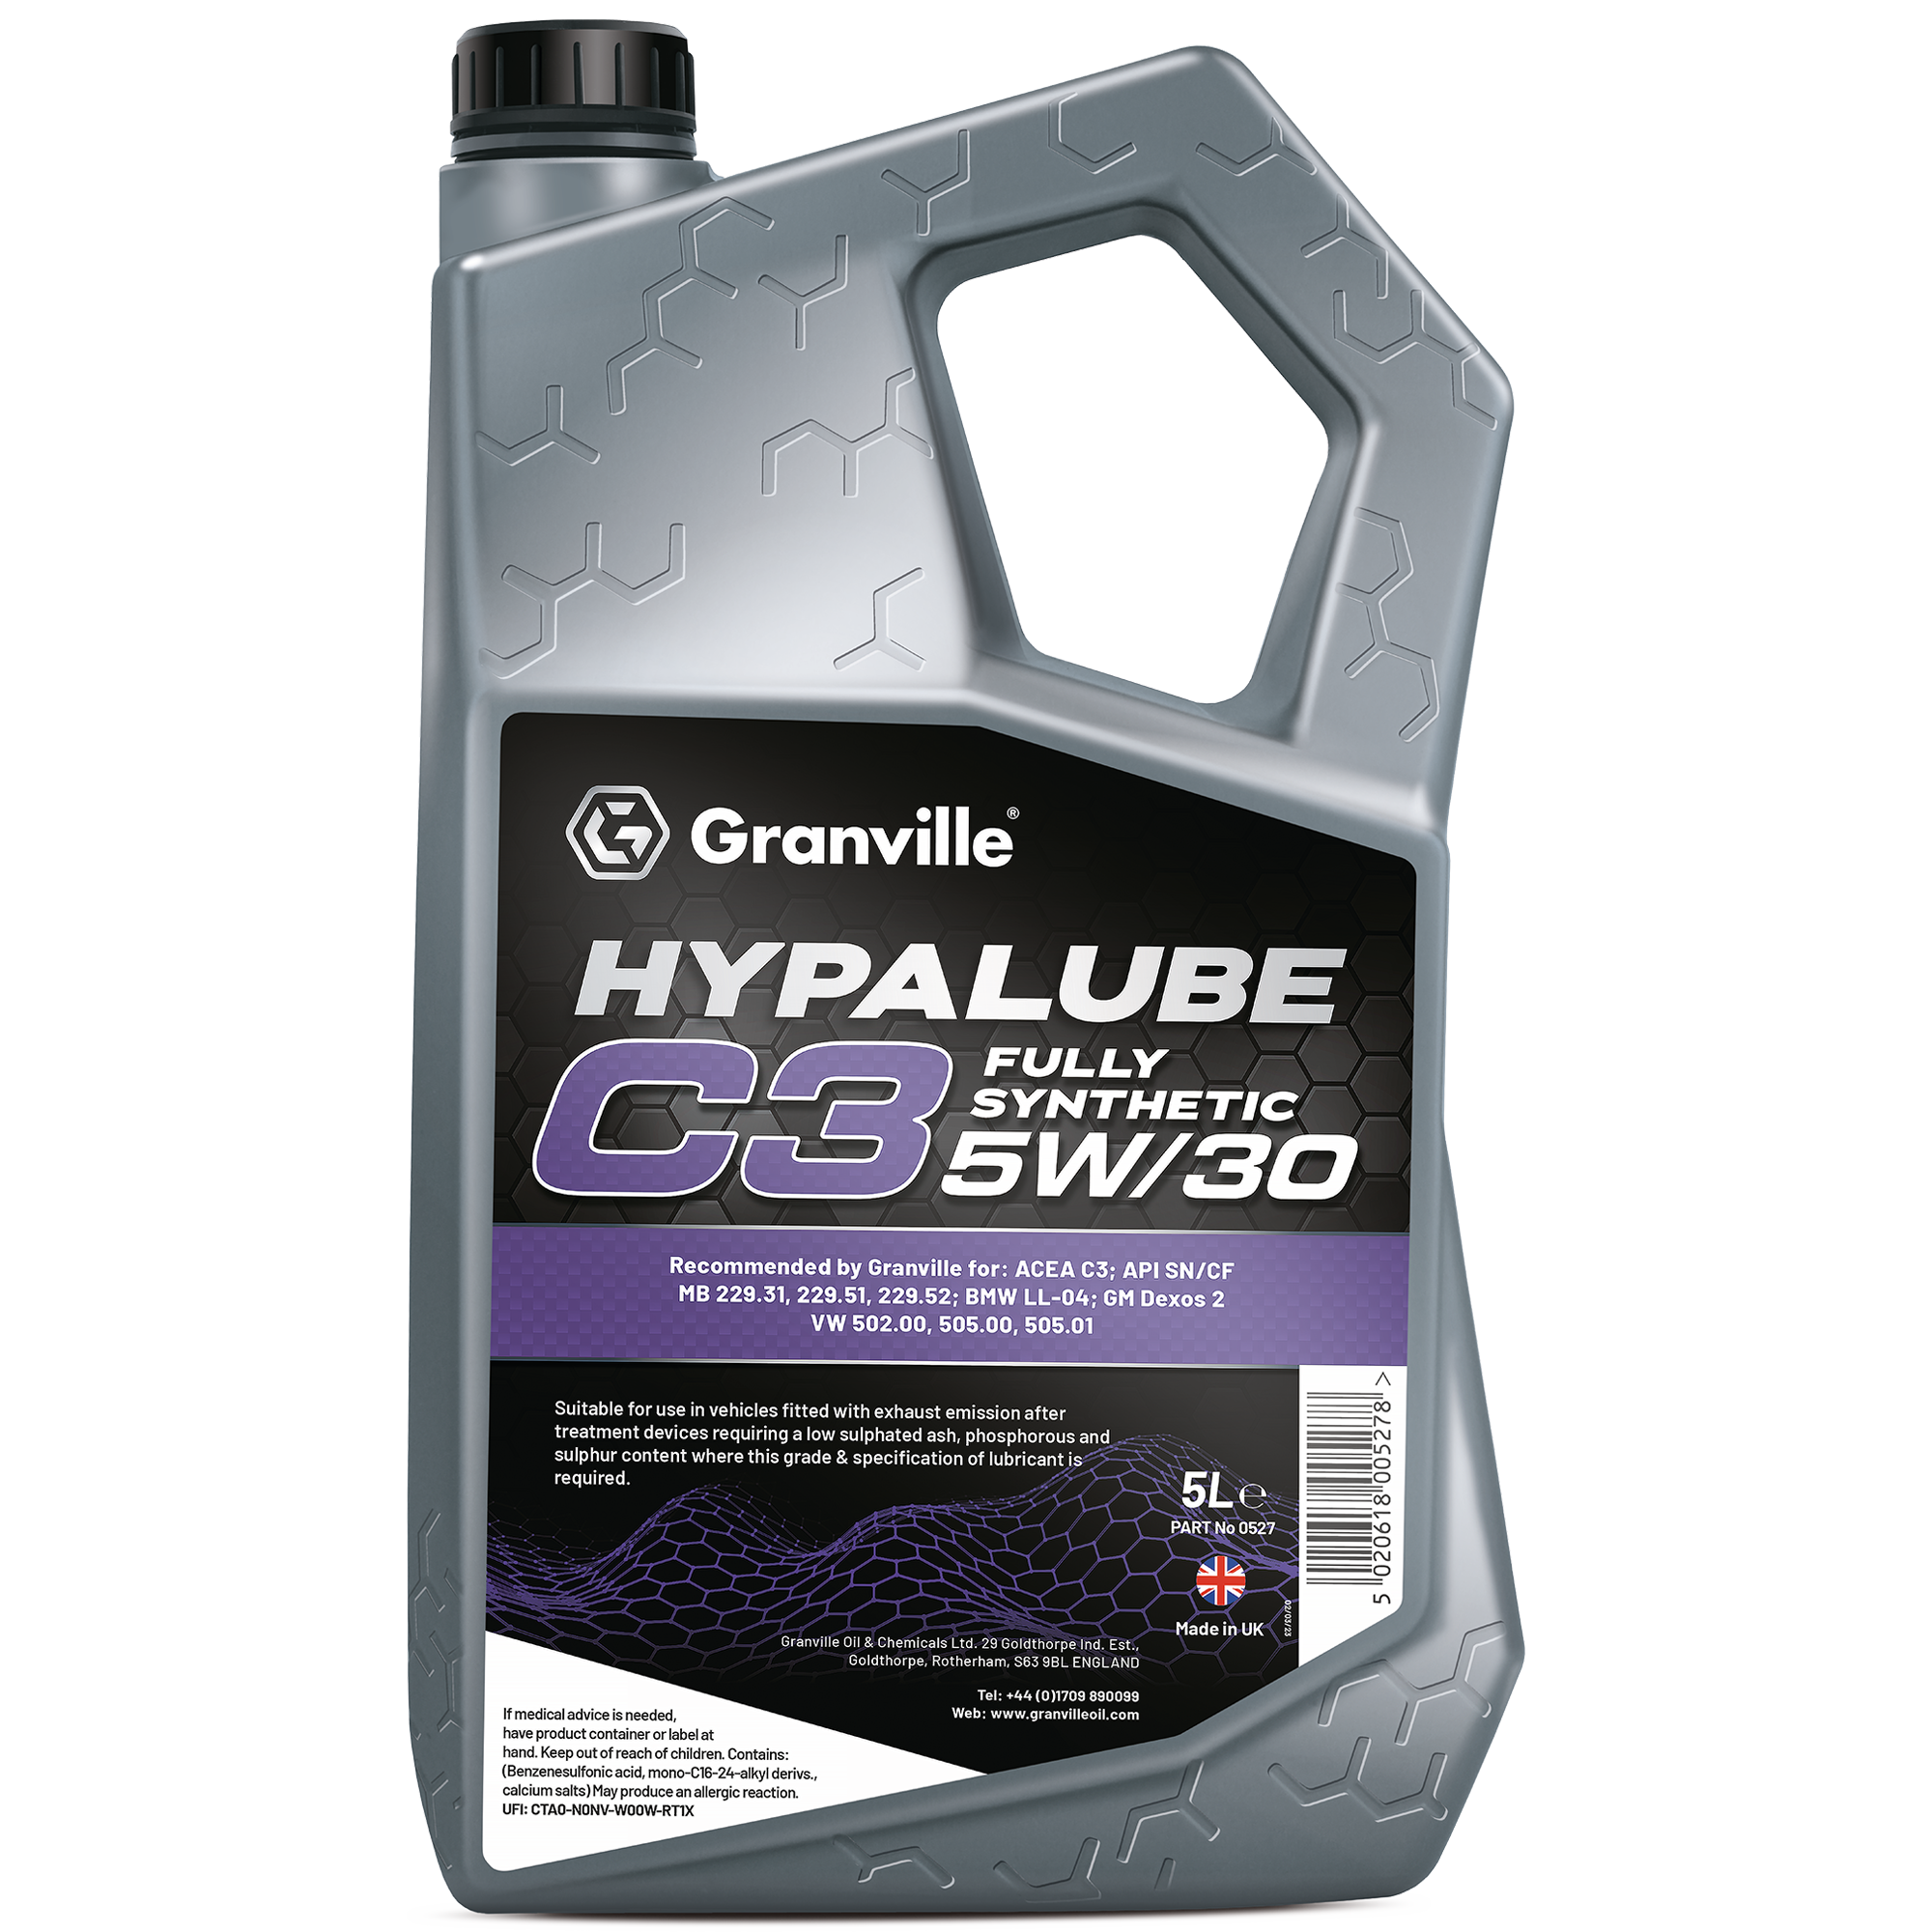 Granville Hypalube C3 Fully Synthetic 5W/30 5 Litre